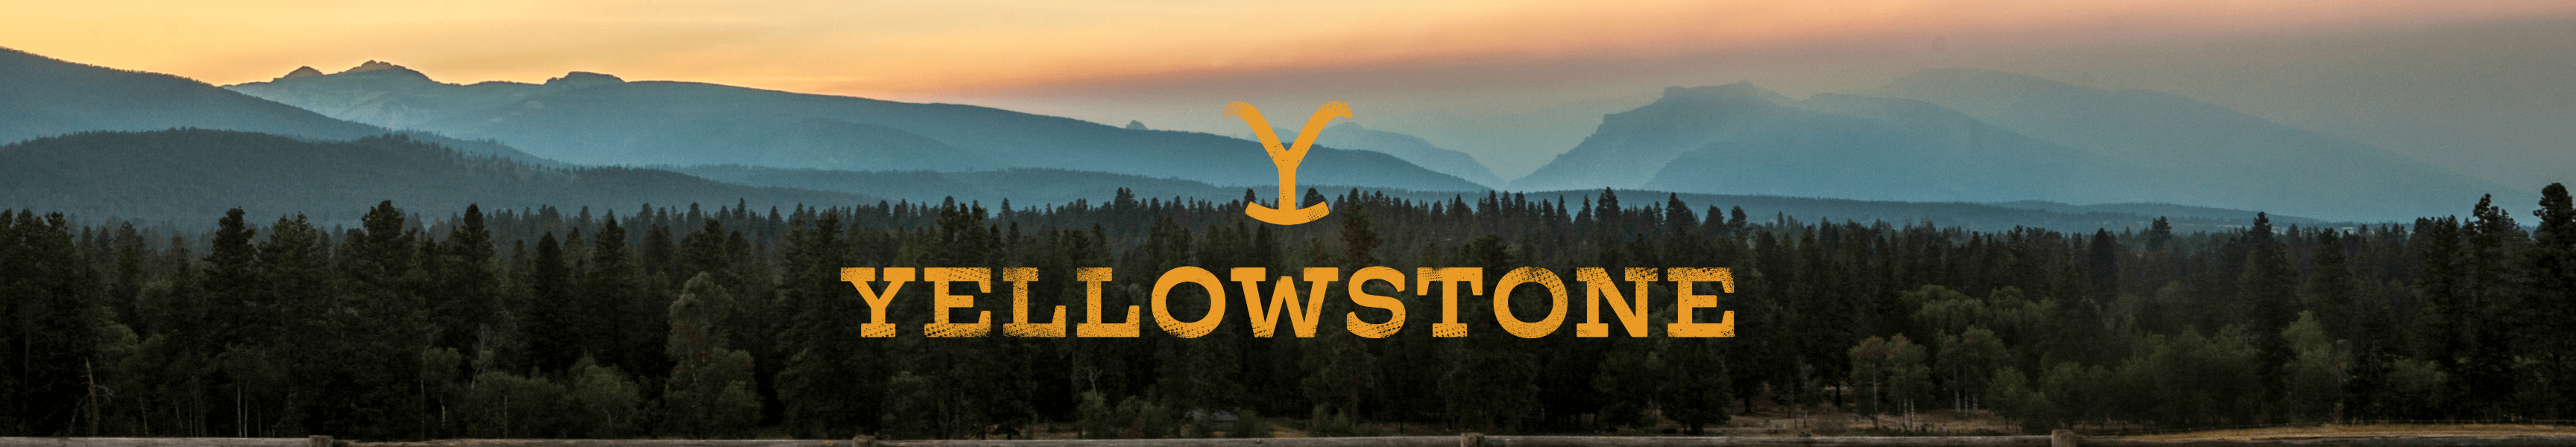 Our Gift to You: Discounted Yellowstone Merchandise